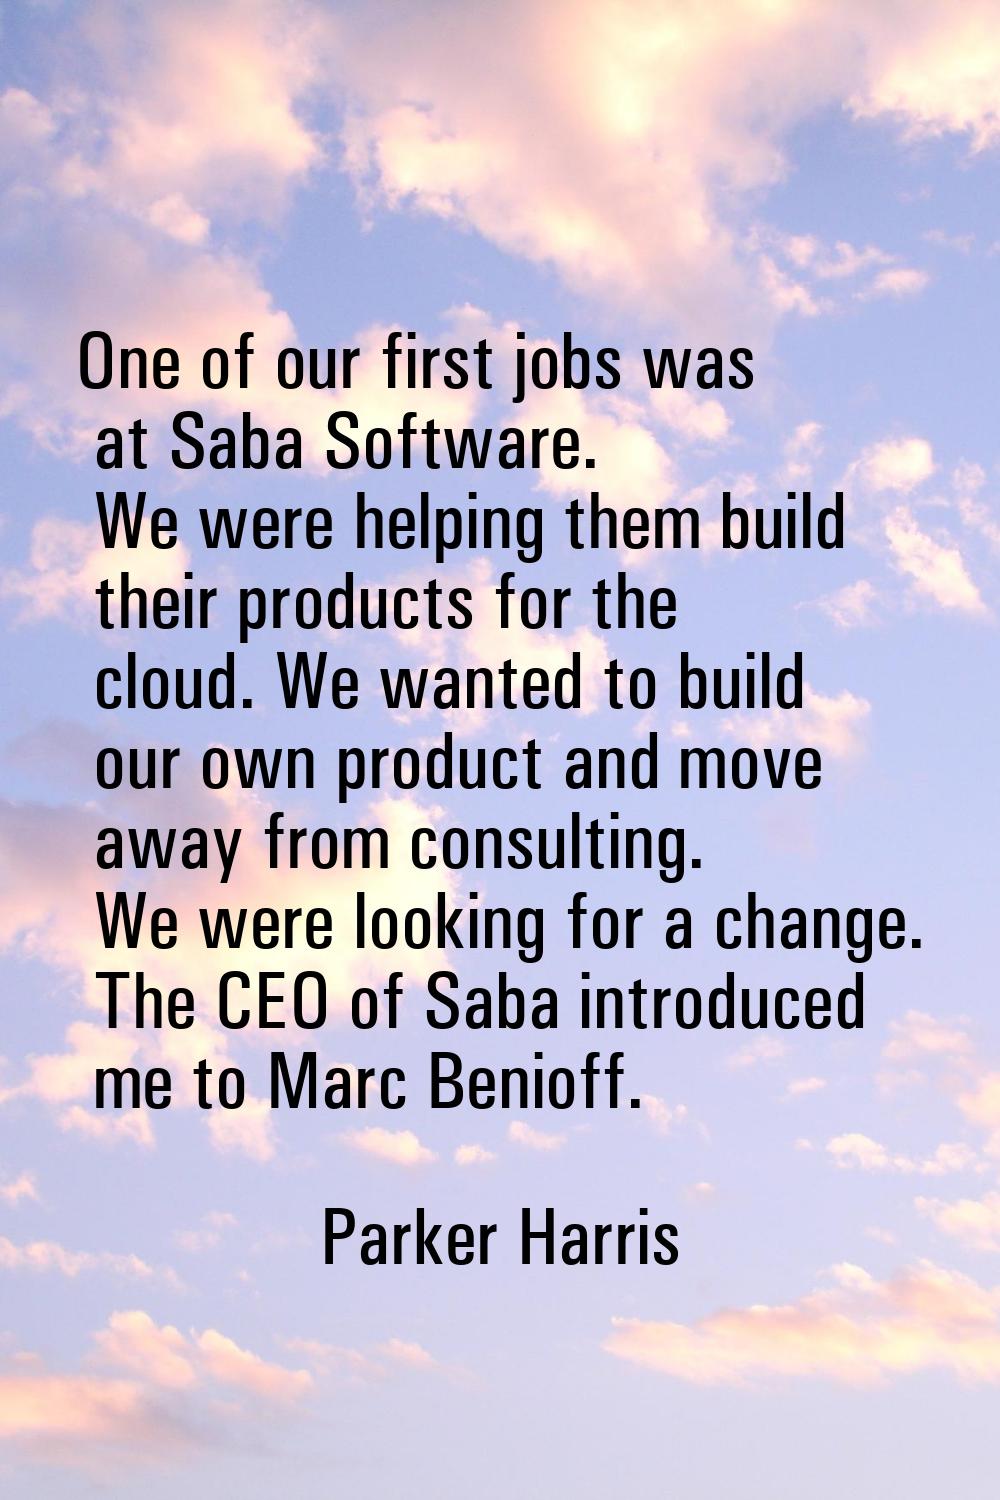 One of our first jobs was at Saba Software. We were helping them build their products for the cloud